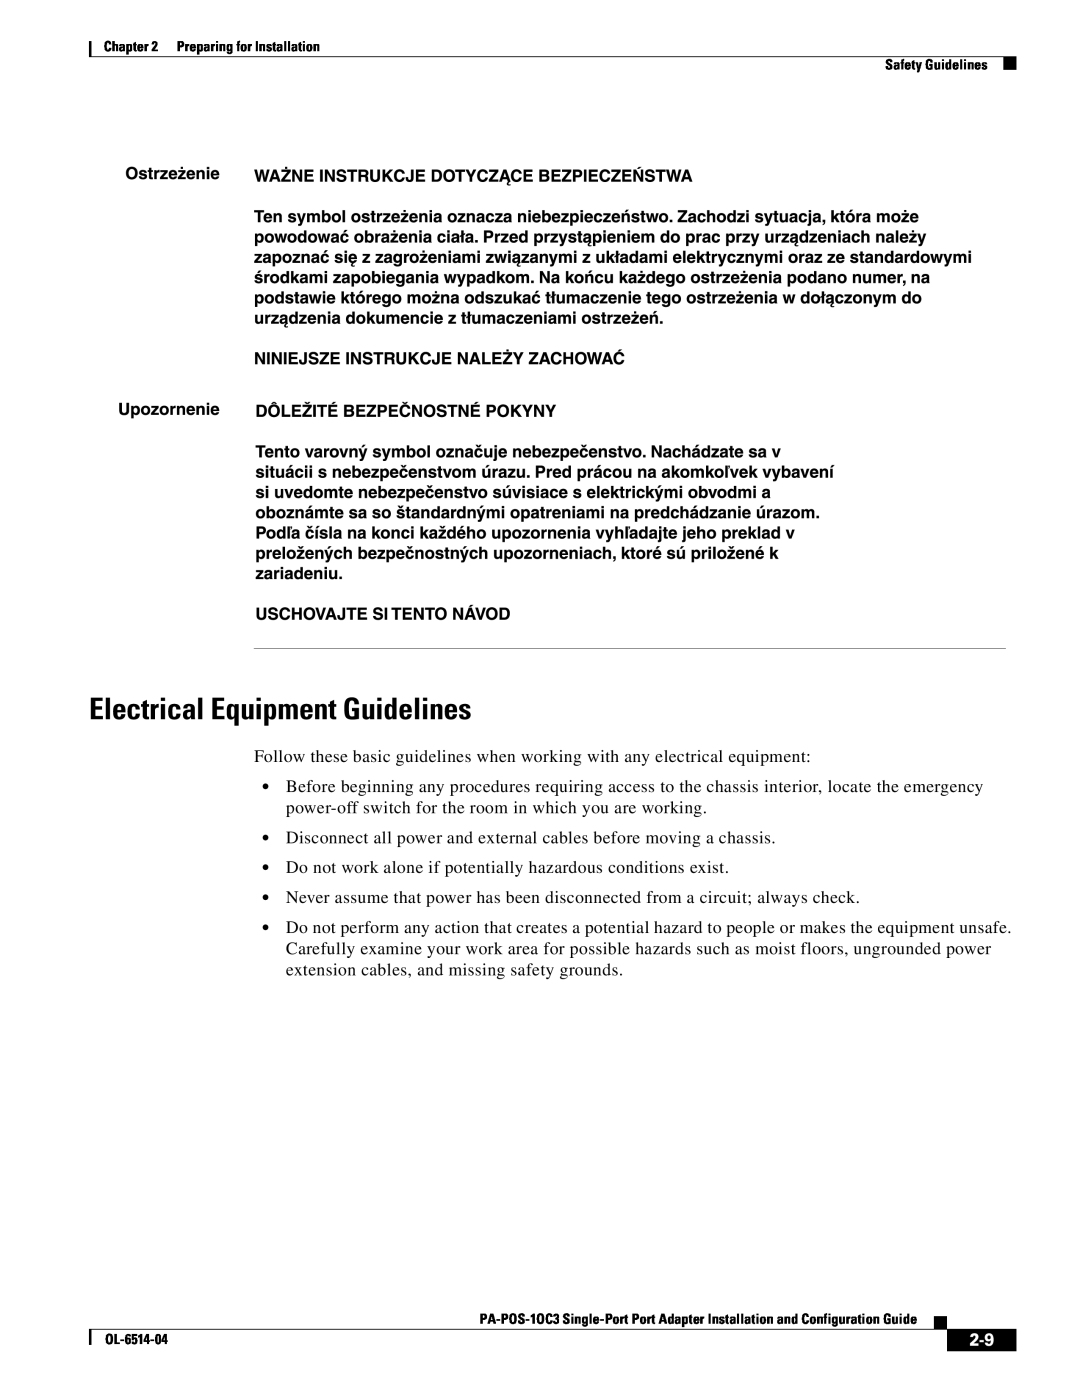 Cisco Systems PA-POS-1OC3, PA-POS-2OC3 manual Electrical Equipment Guidelines 